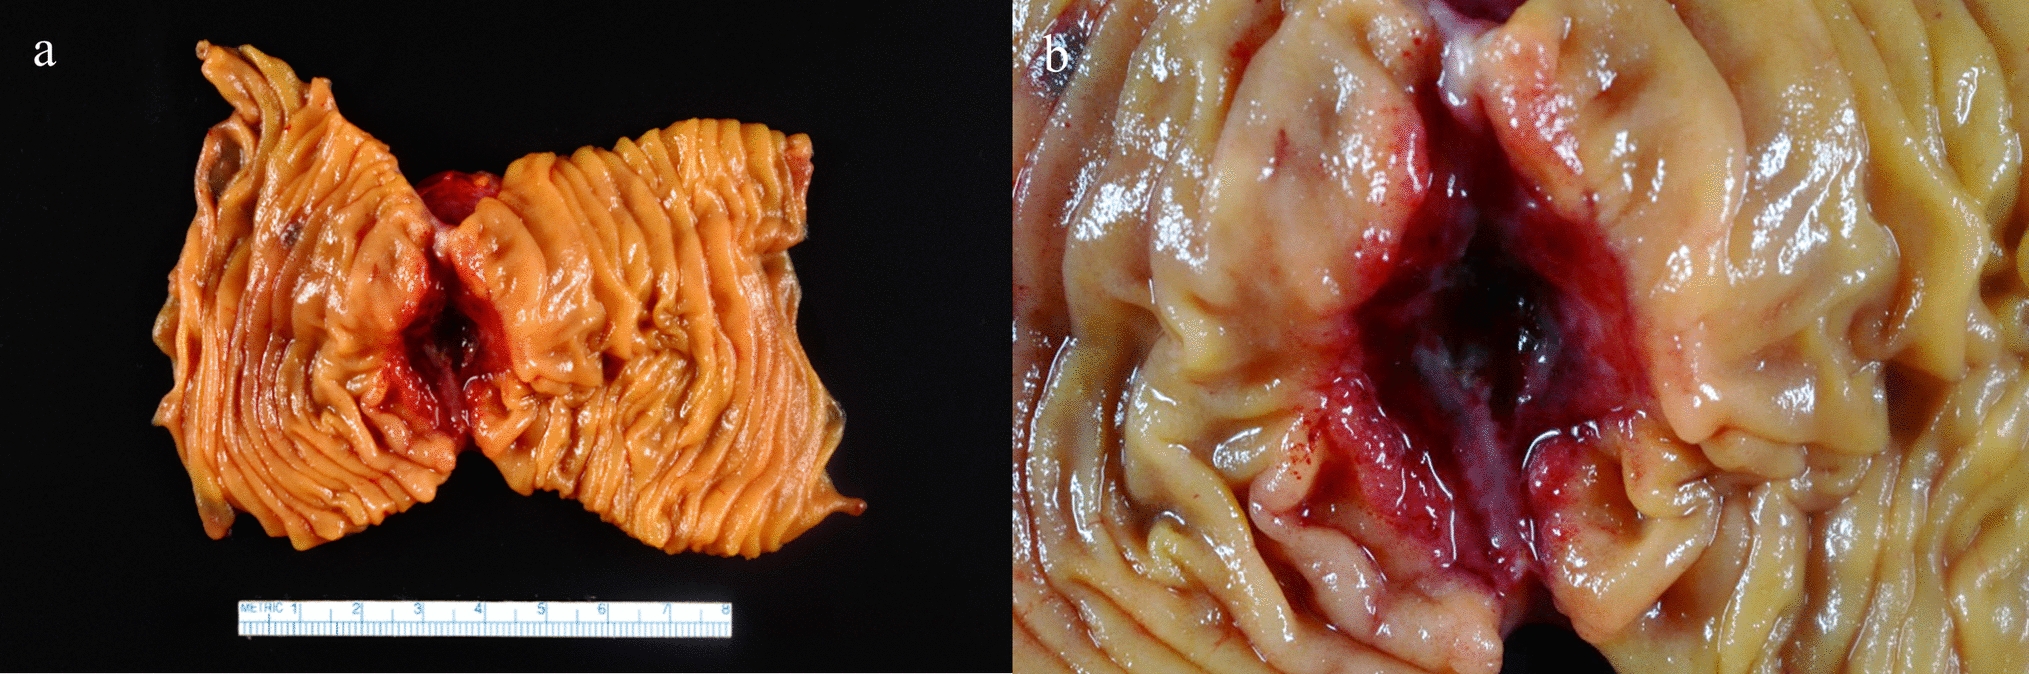 Gastrointestinal histoplasmosis with small intestinal perforation: 20-year experience